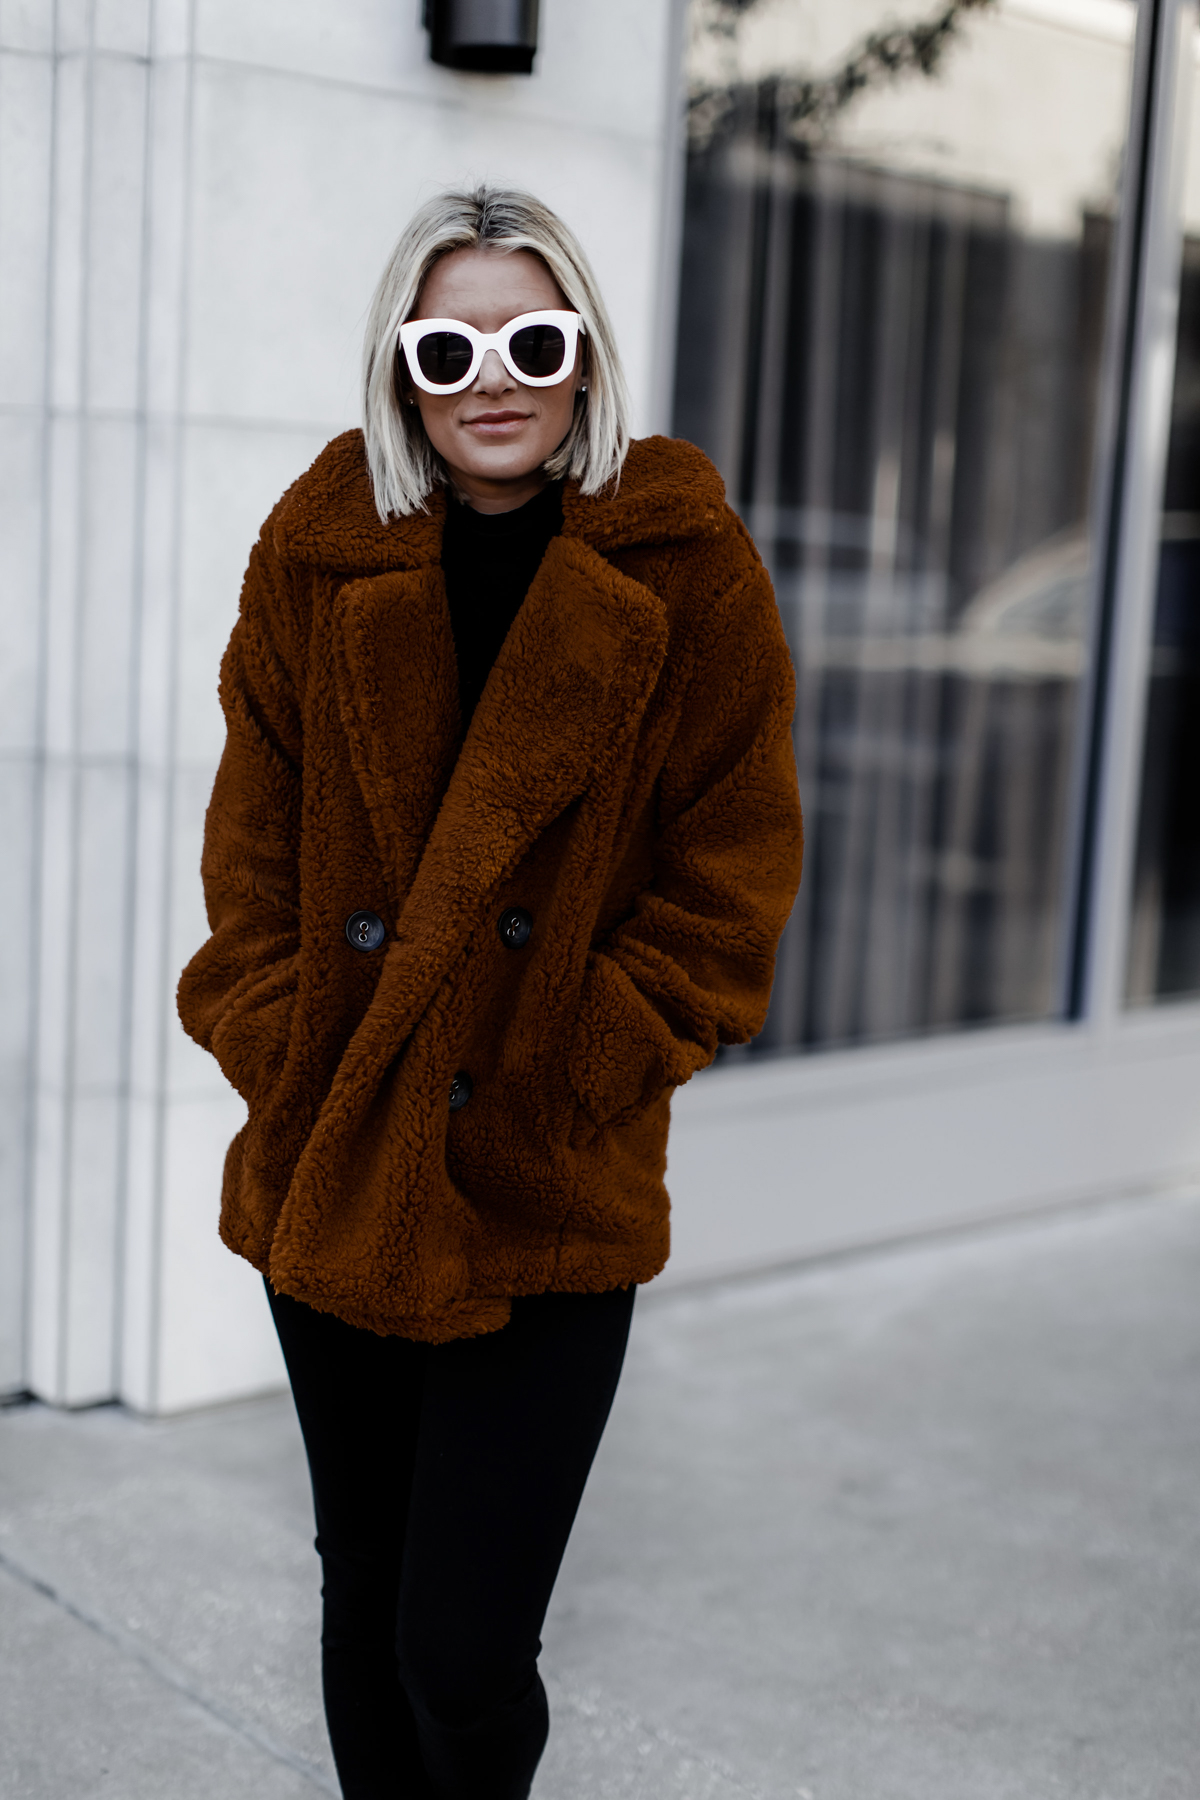 Blogger Sage Coralli in an oversized cozy Free People peacoat